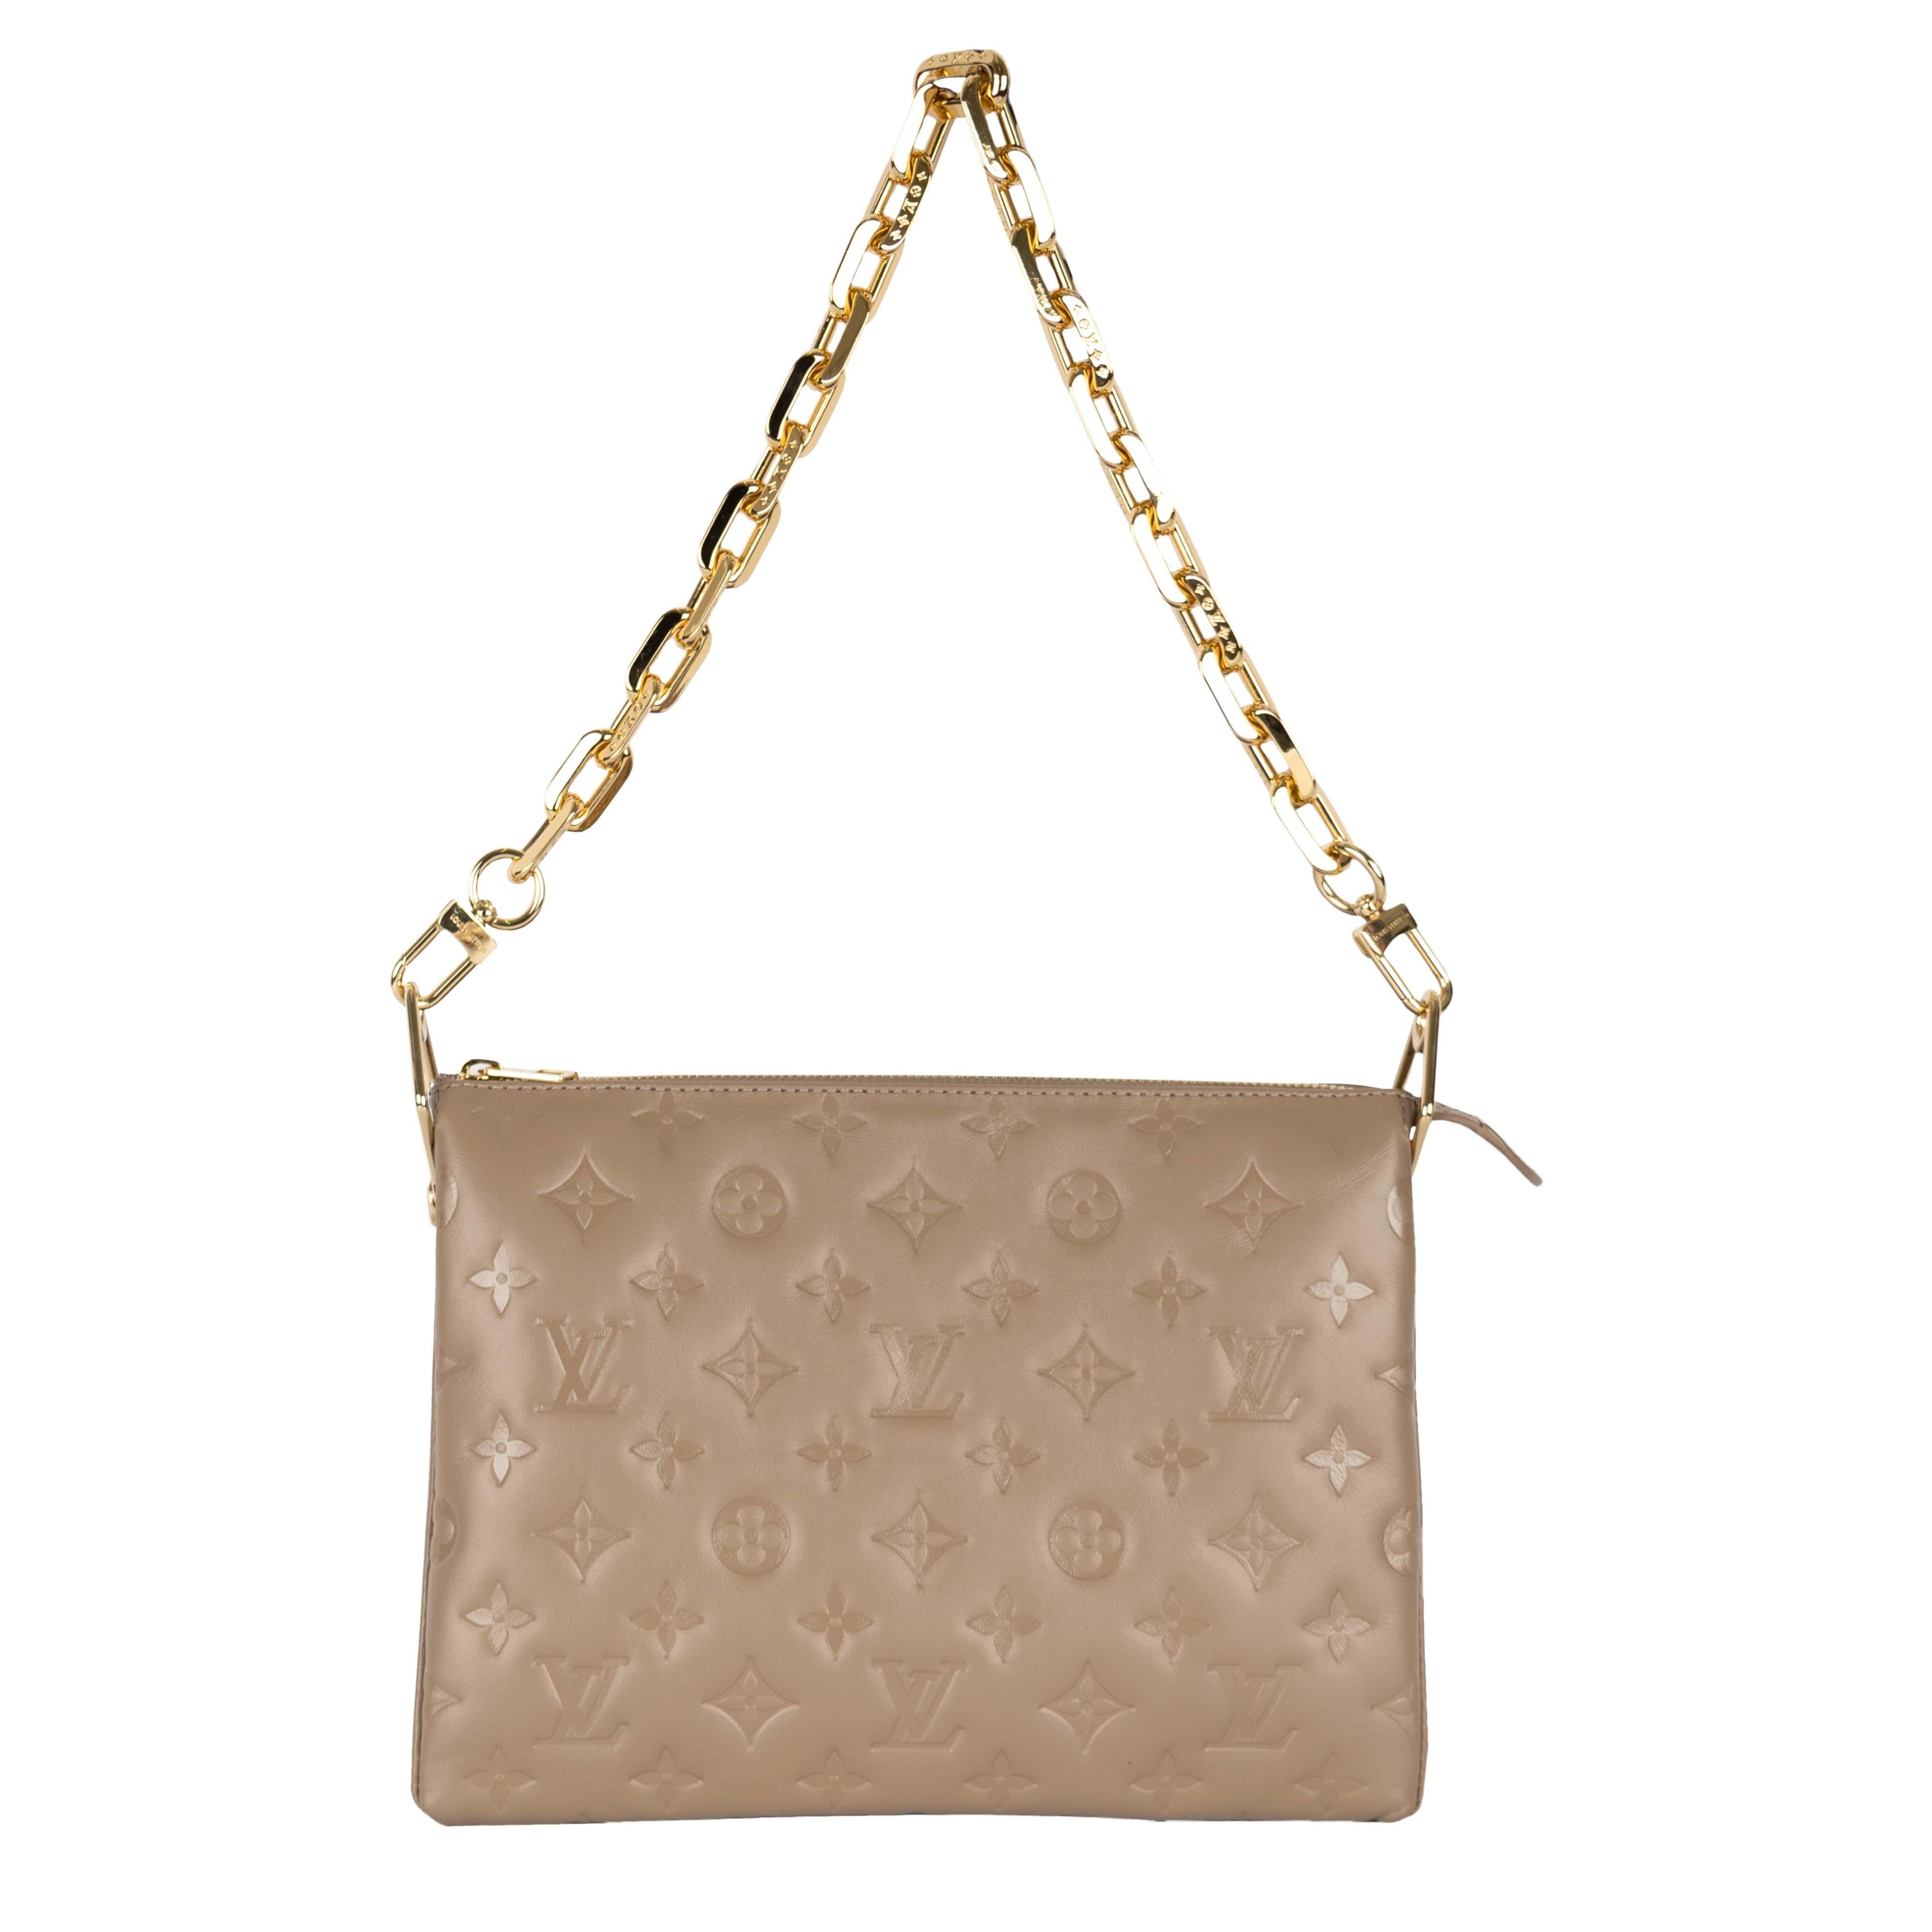 Louis Vuitton Coussin PM bag in a taupe champagne color with a metallic sheen. The bag features LV monogram embossed on the puffy lambskin leather. It has a zippered top which opens to three compartments inside making it a spacious bag to hold all